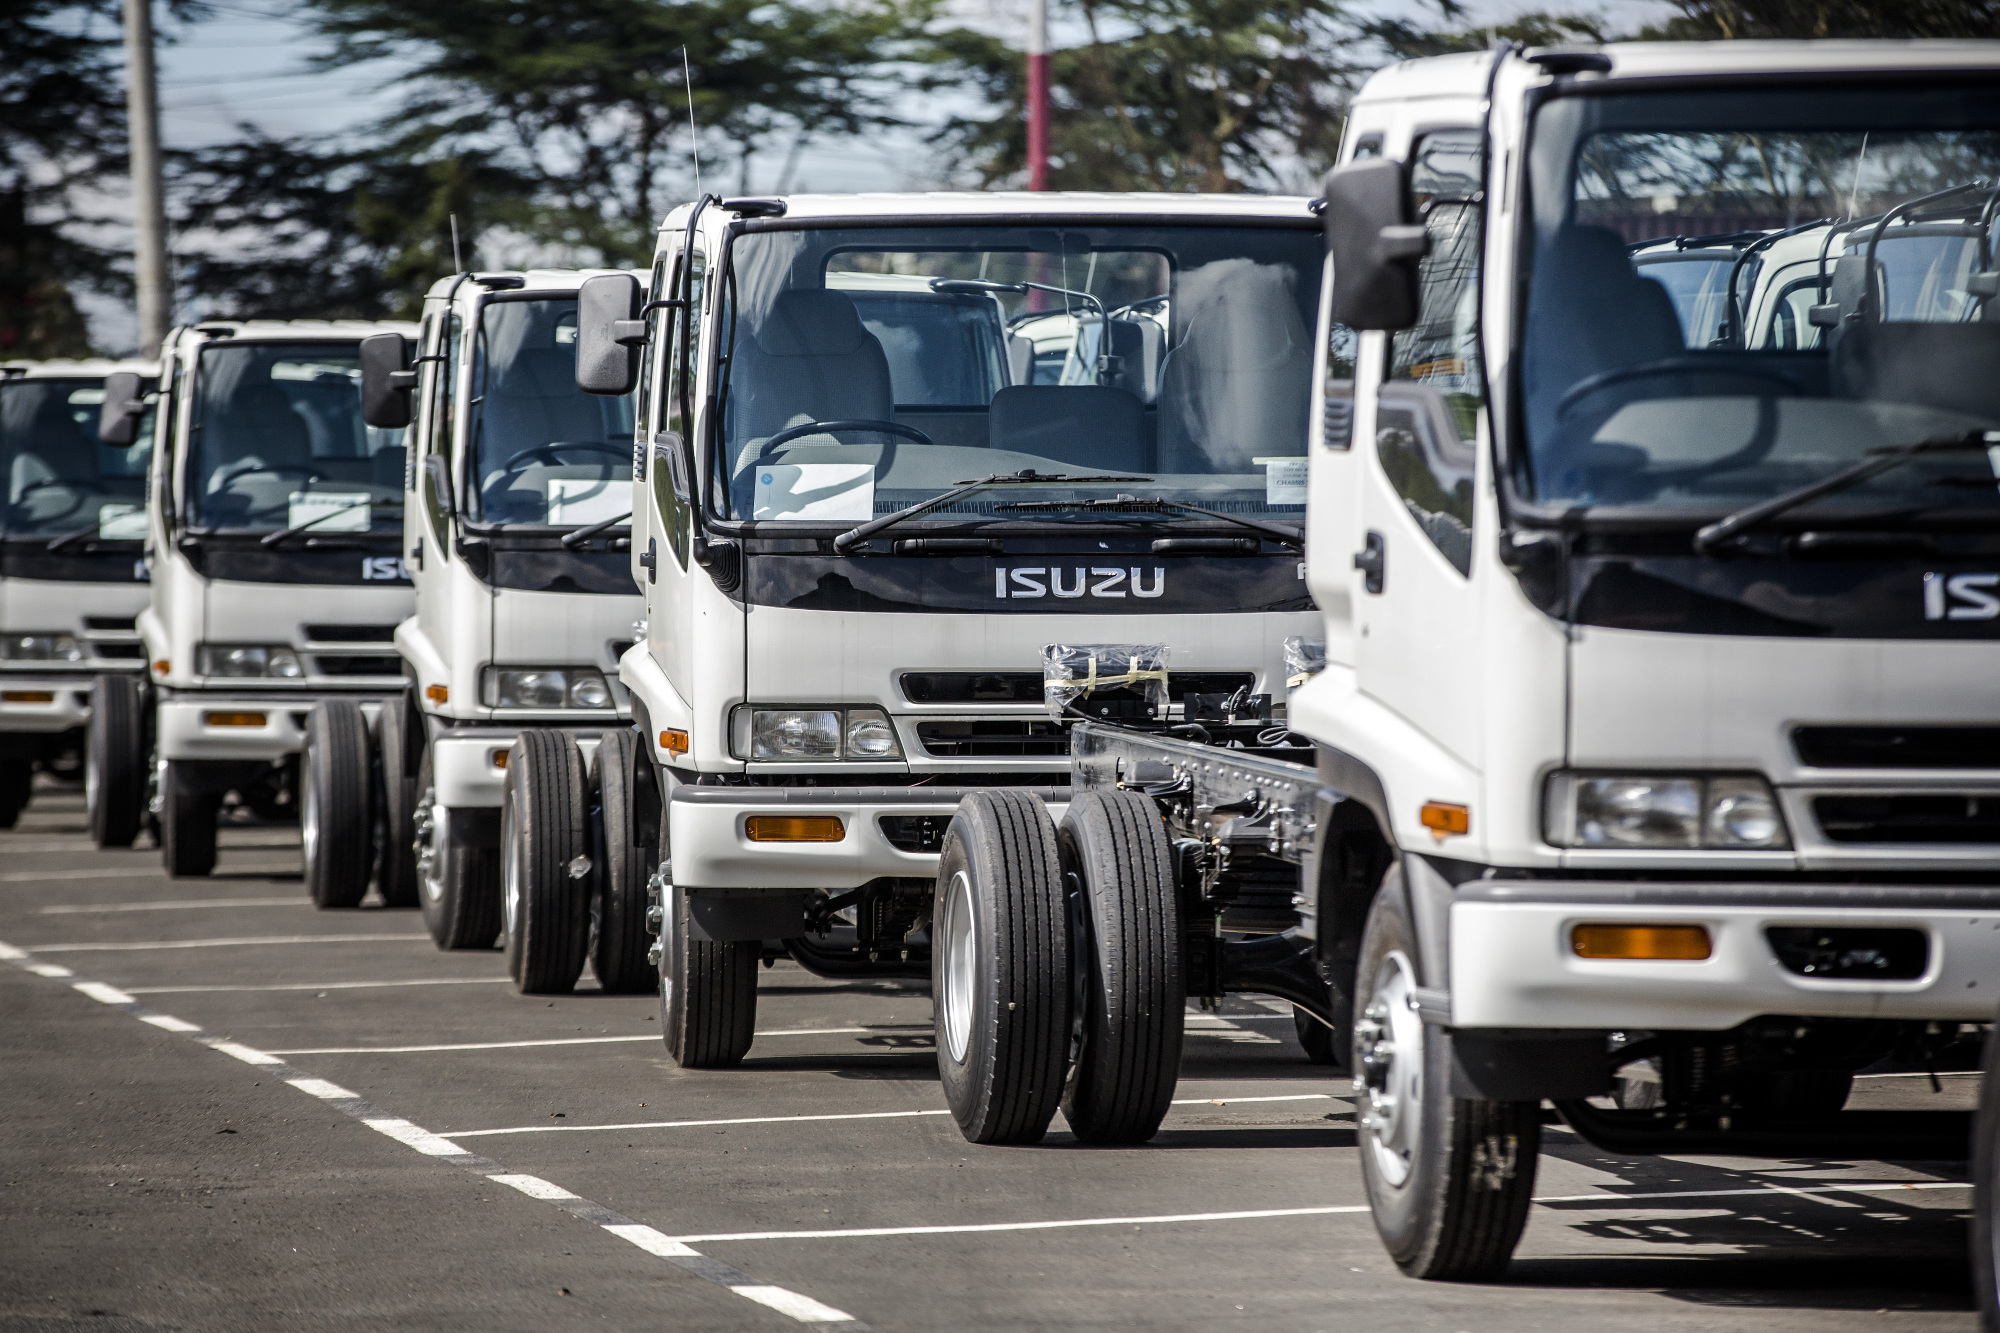 ISUZU continues to lead in market sales, maintaining its No. 1 position as Malaysia’s top truck brand.